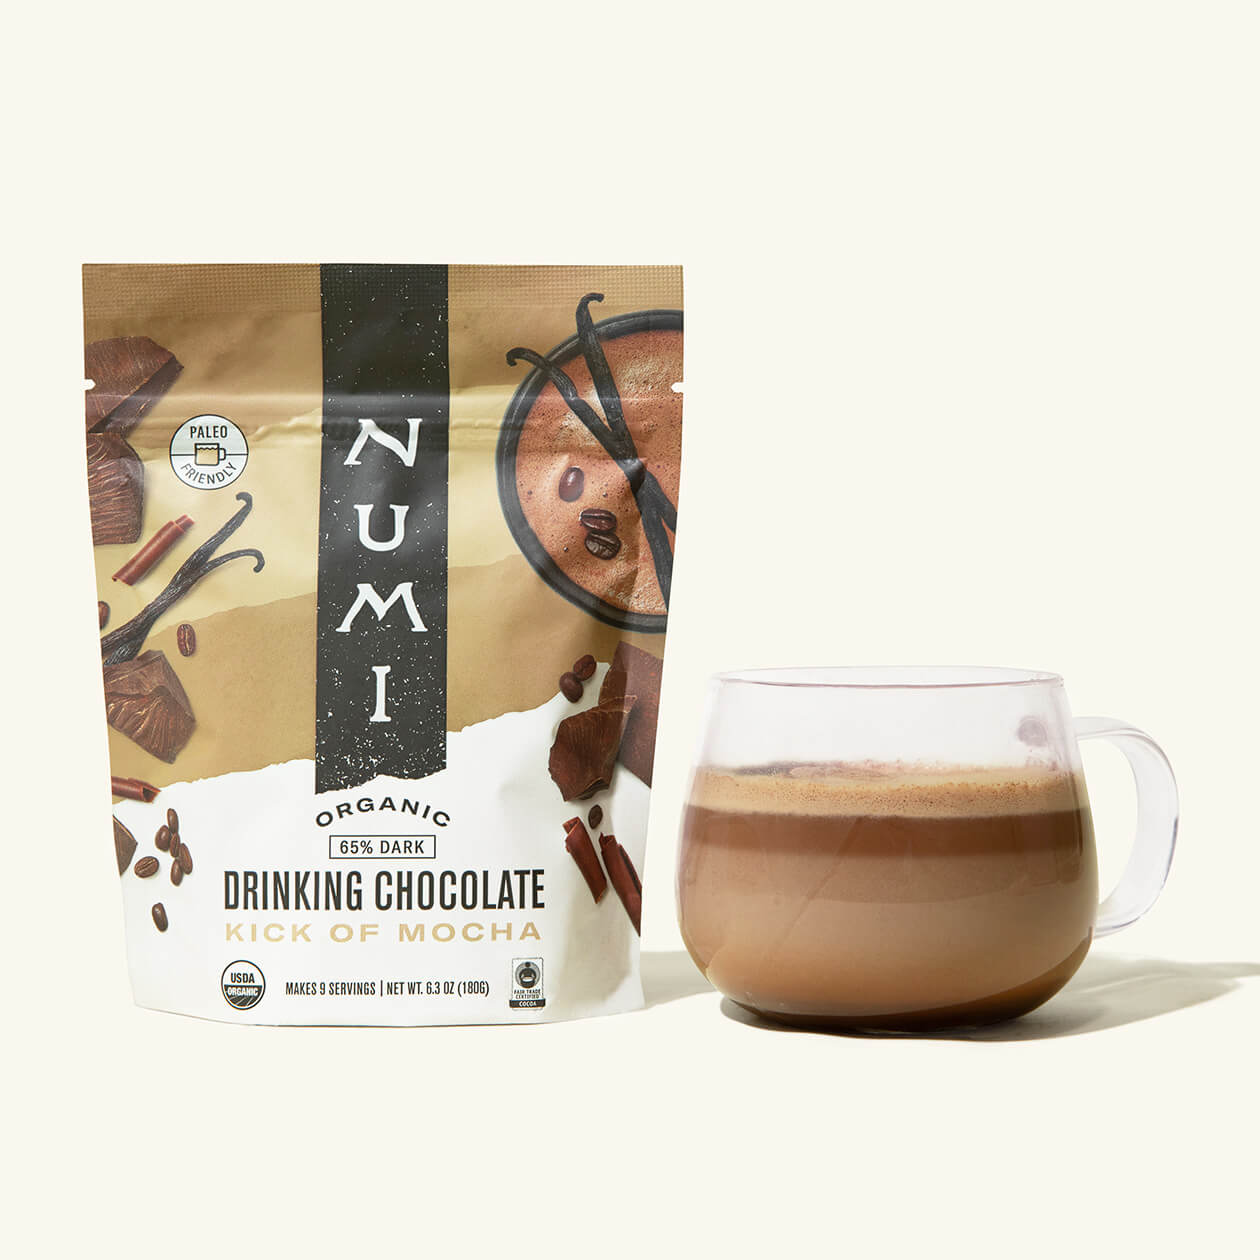 A pouch of Numi organic Drinking Chocolate, Kick Of Mocha Flavor, next to a cup of hot chocolate